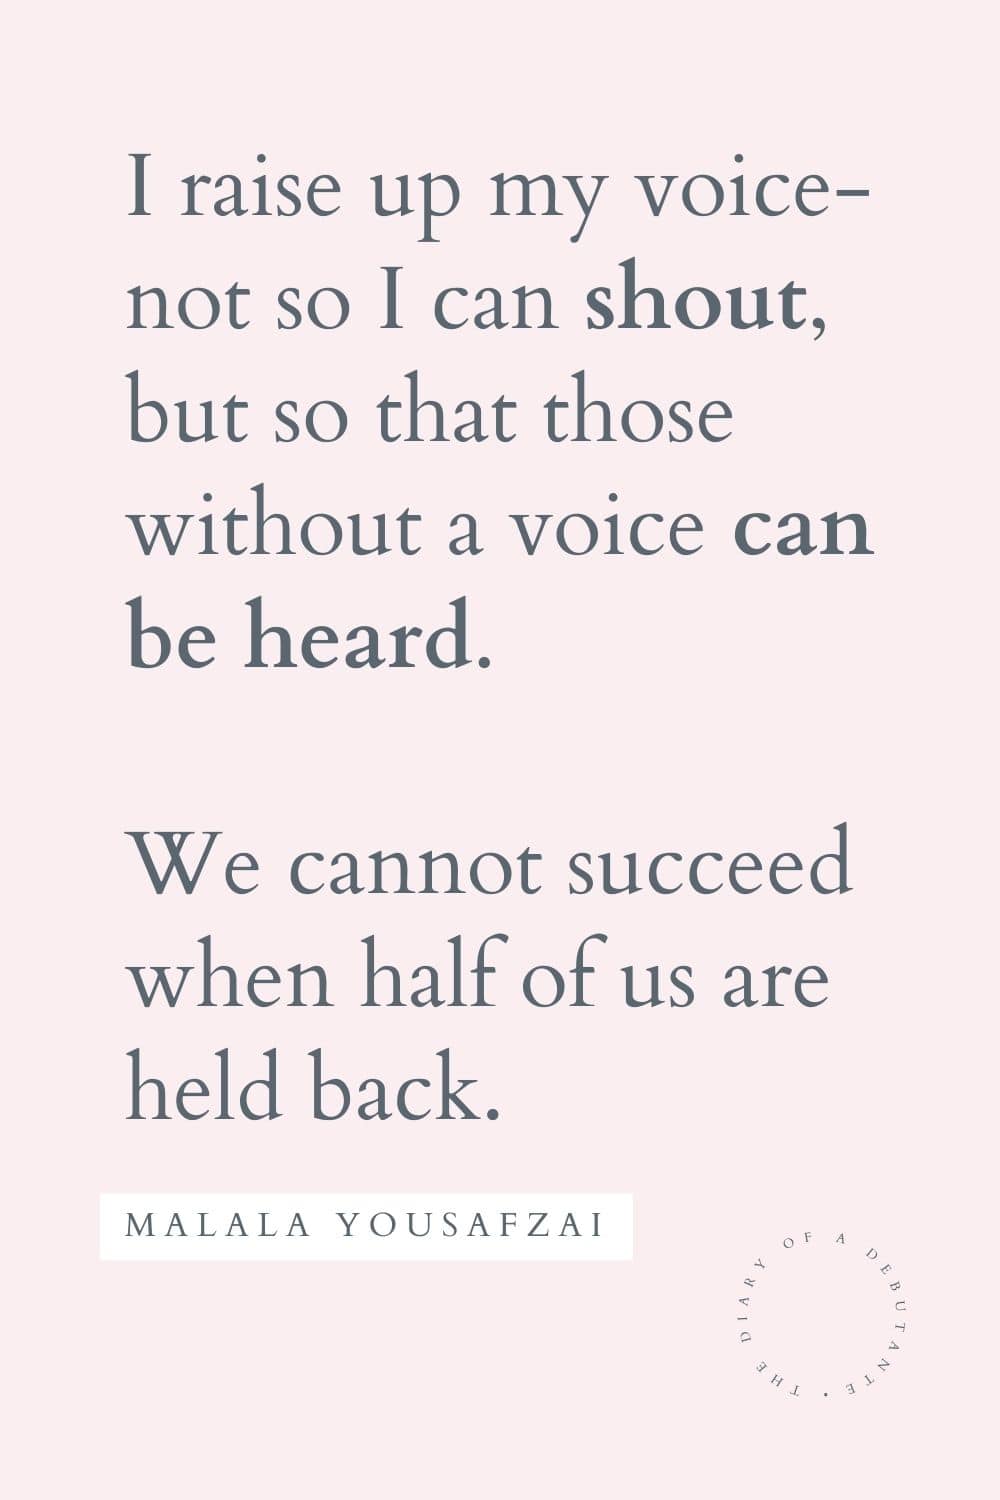 Malala quote curated as part of a collection of motivational quotes for working women by blogger Stephanie Ziajka on Diary of a Debutante